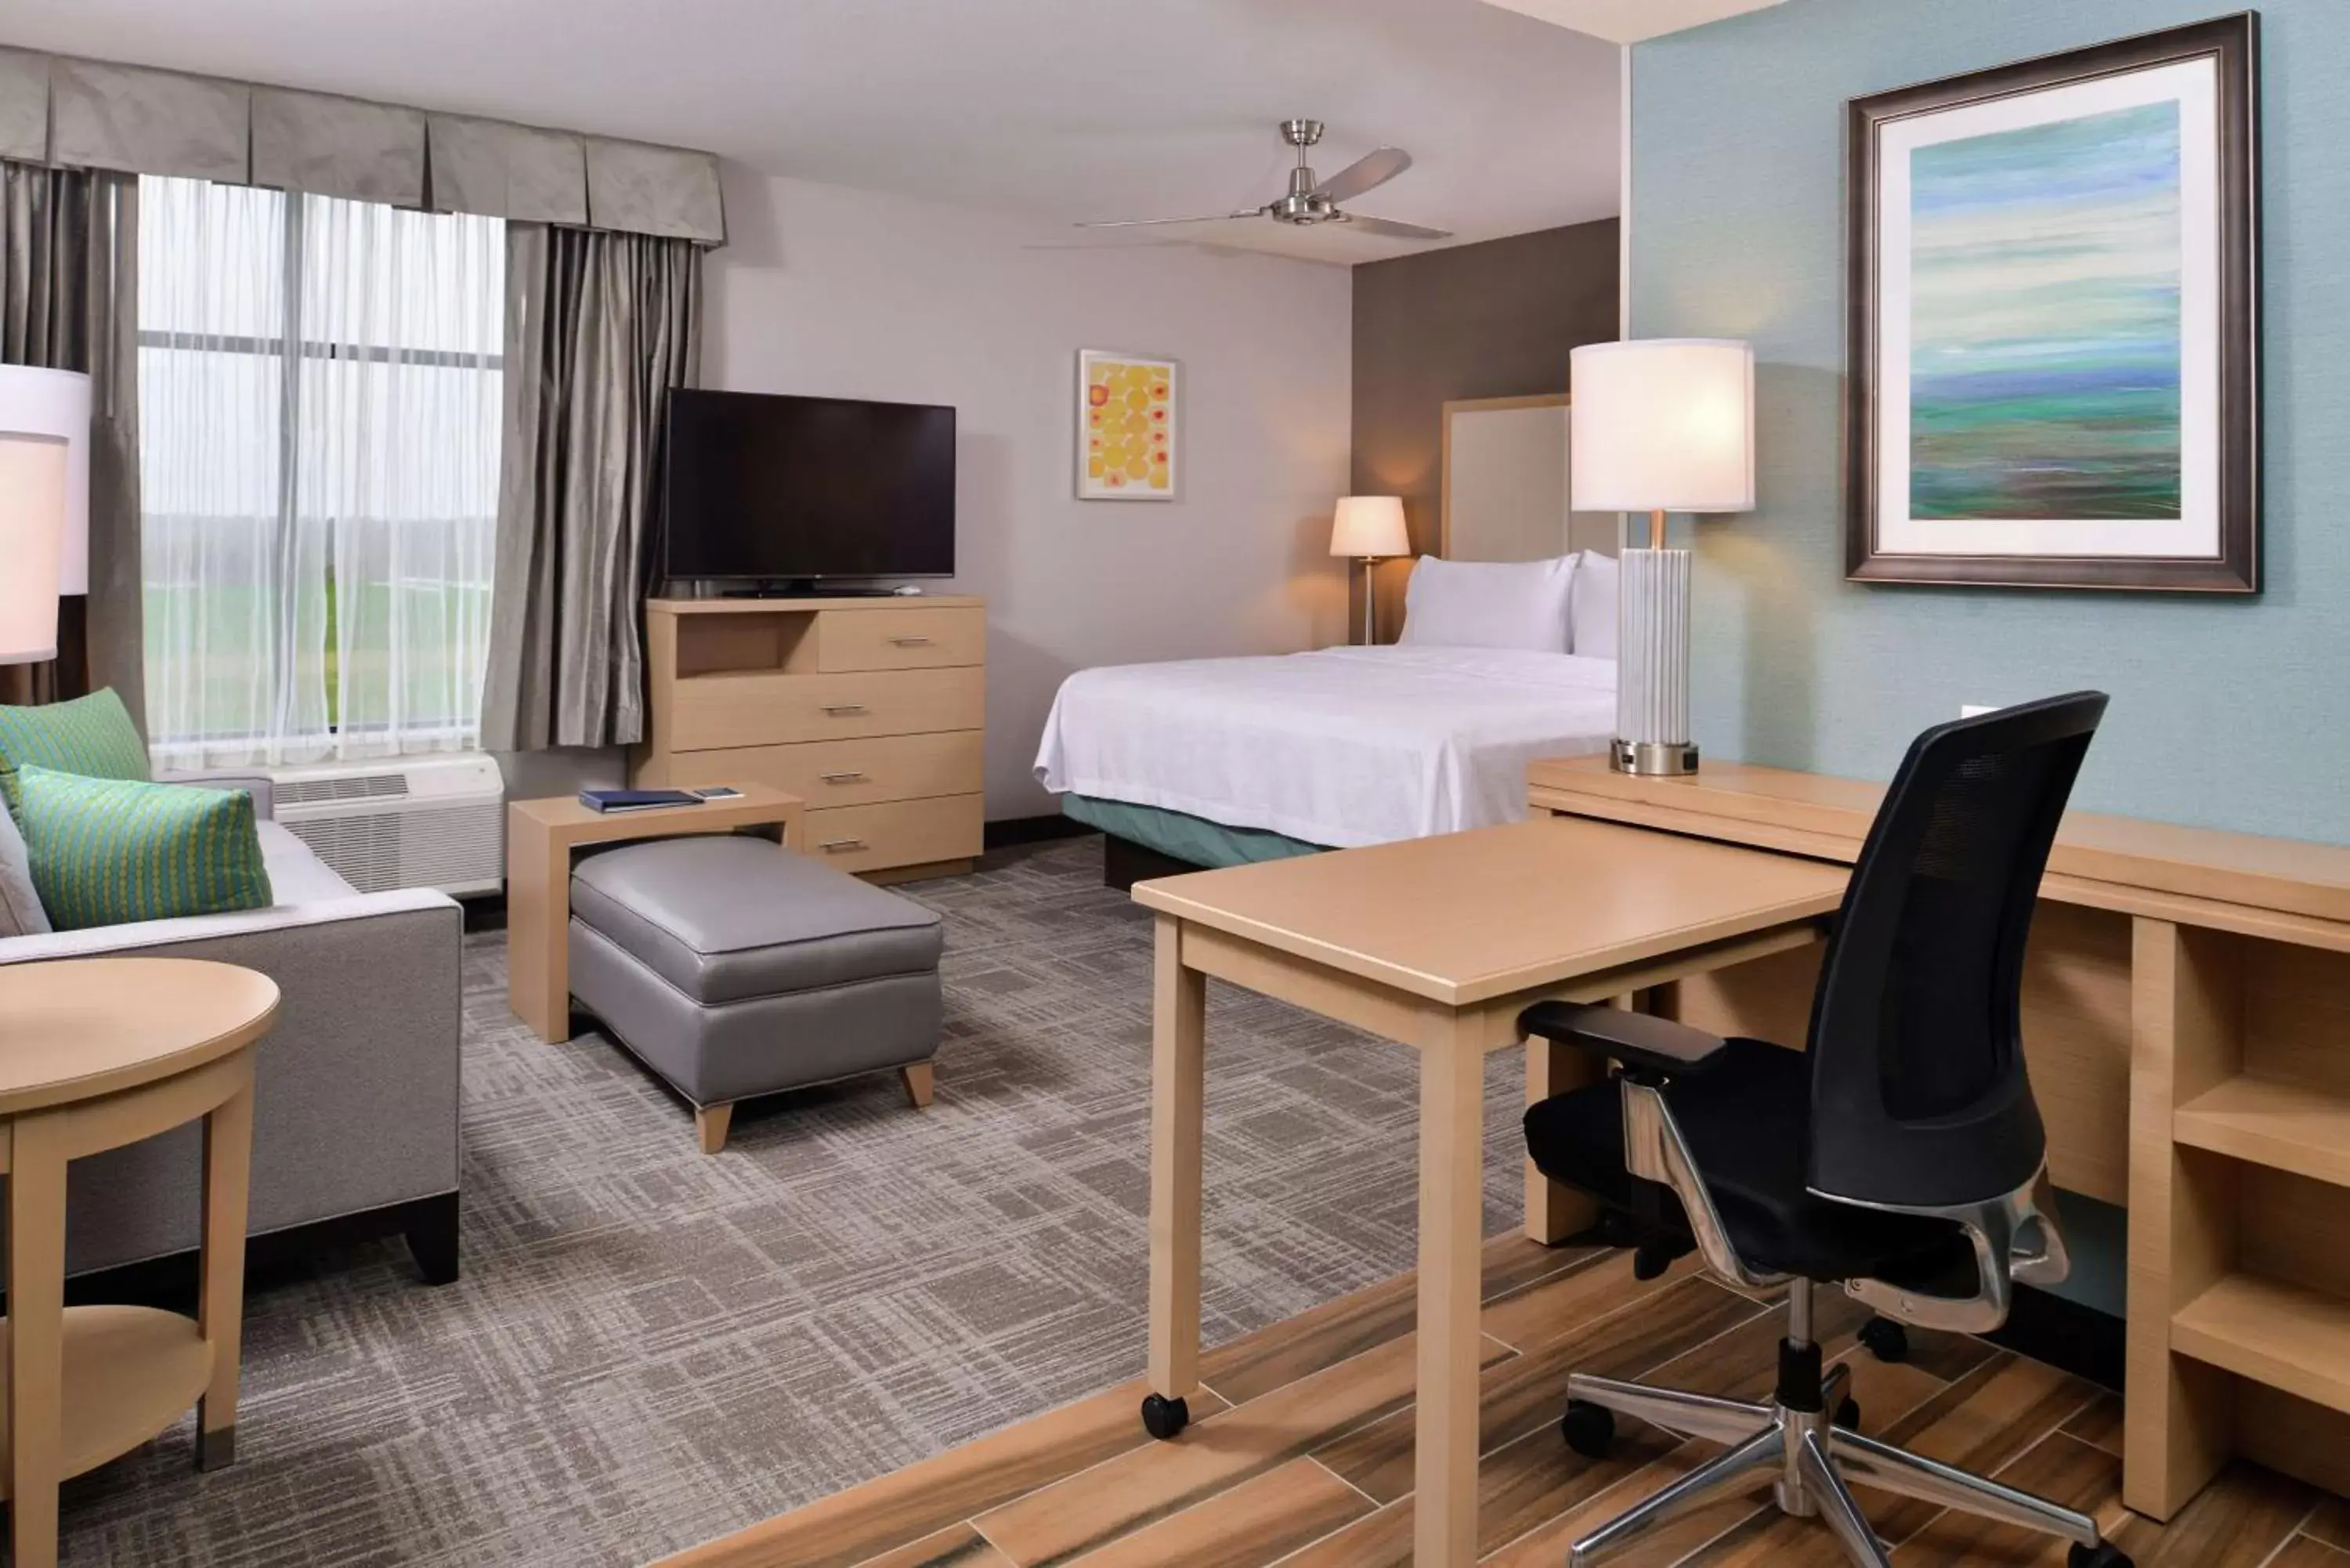 Bedroom in Homewood Suites By Hilton Des Moines Airport